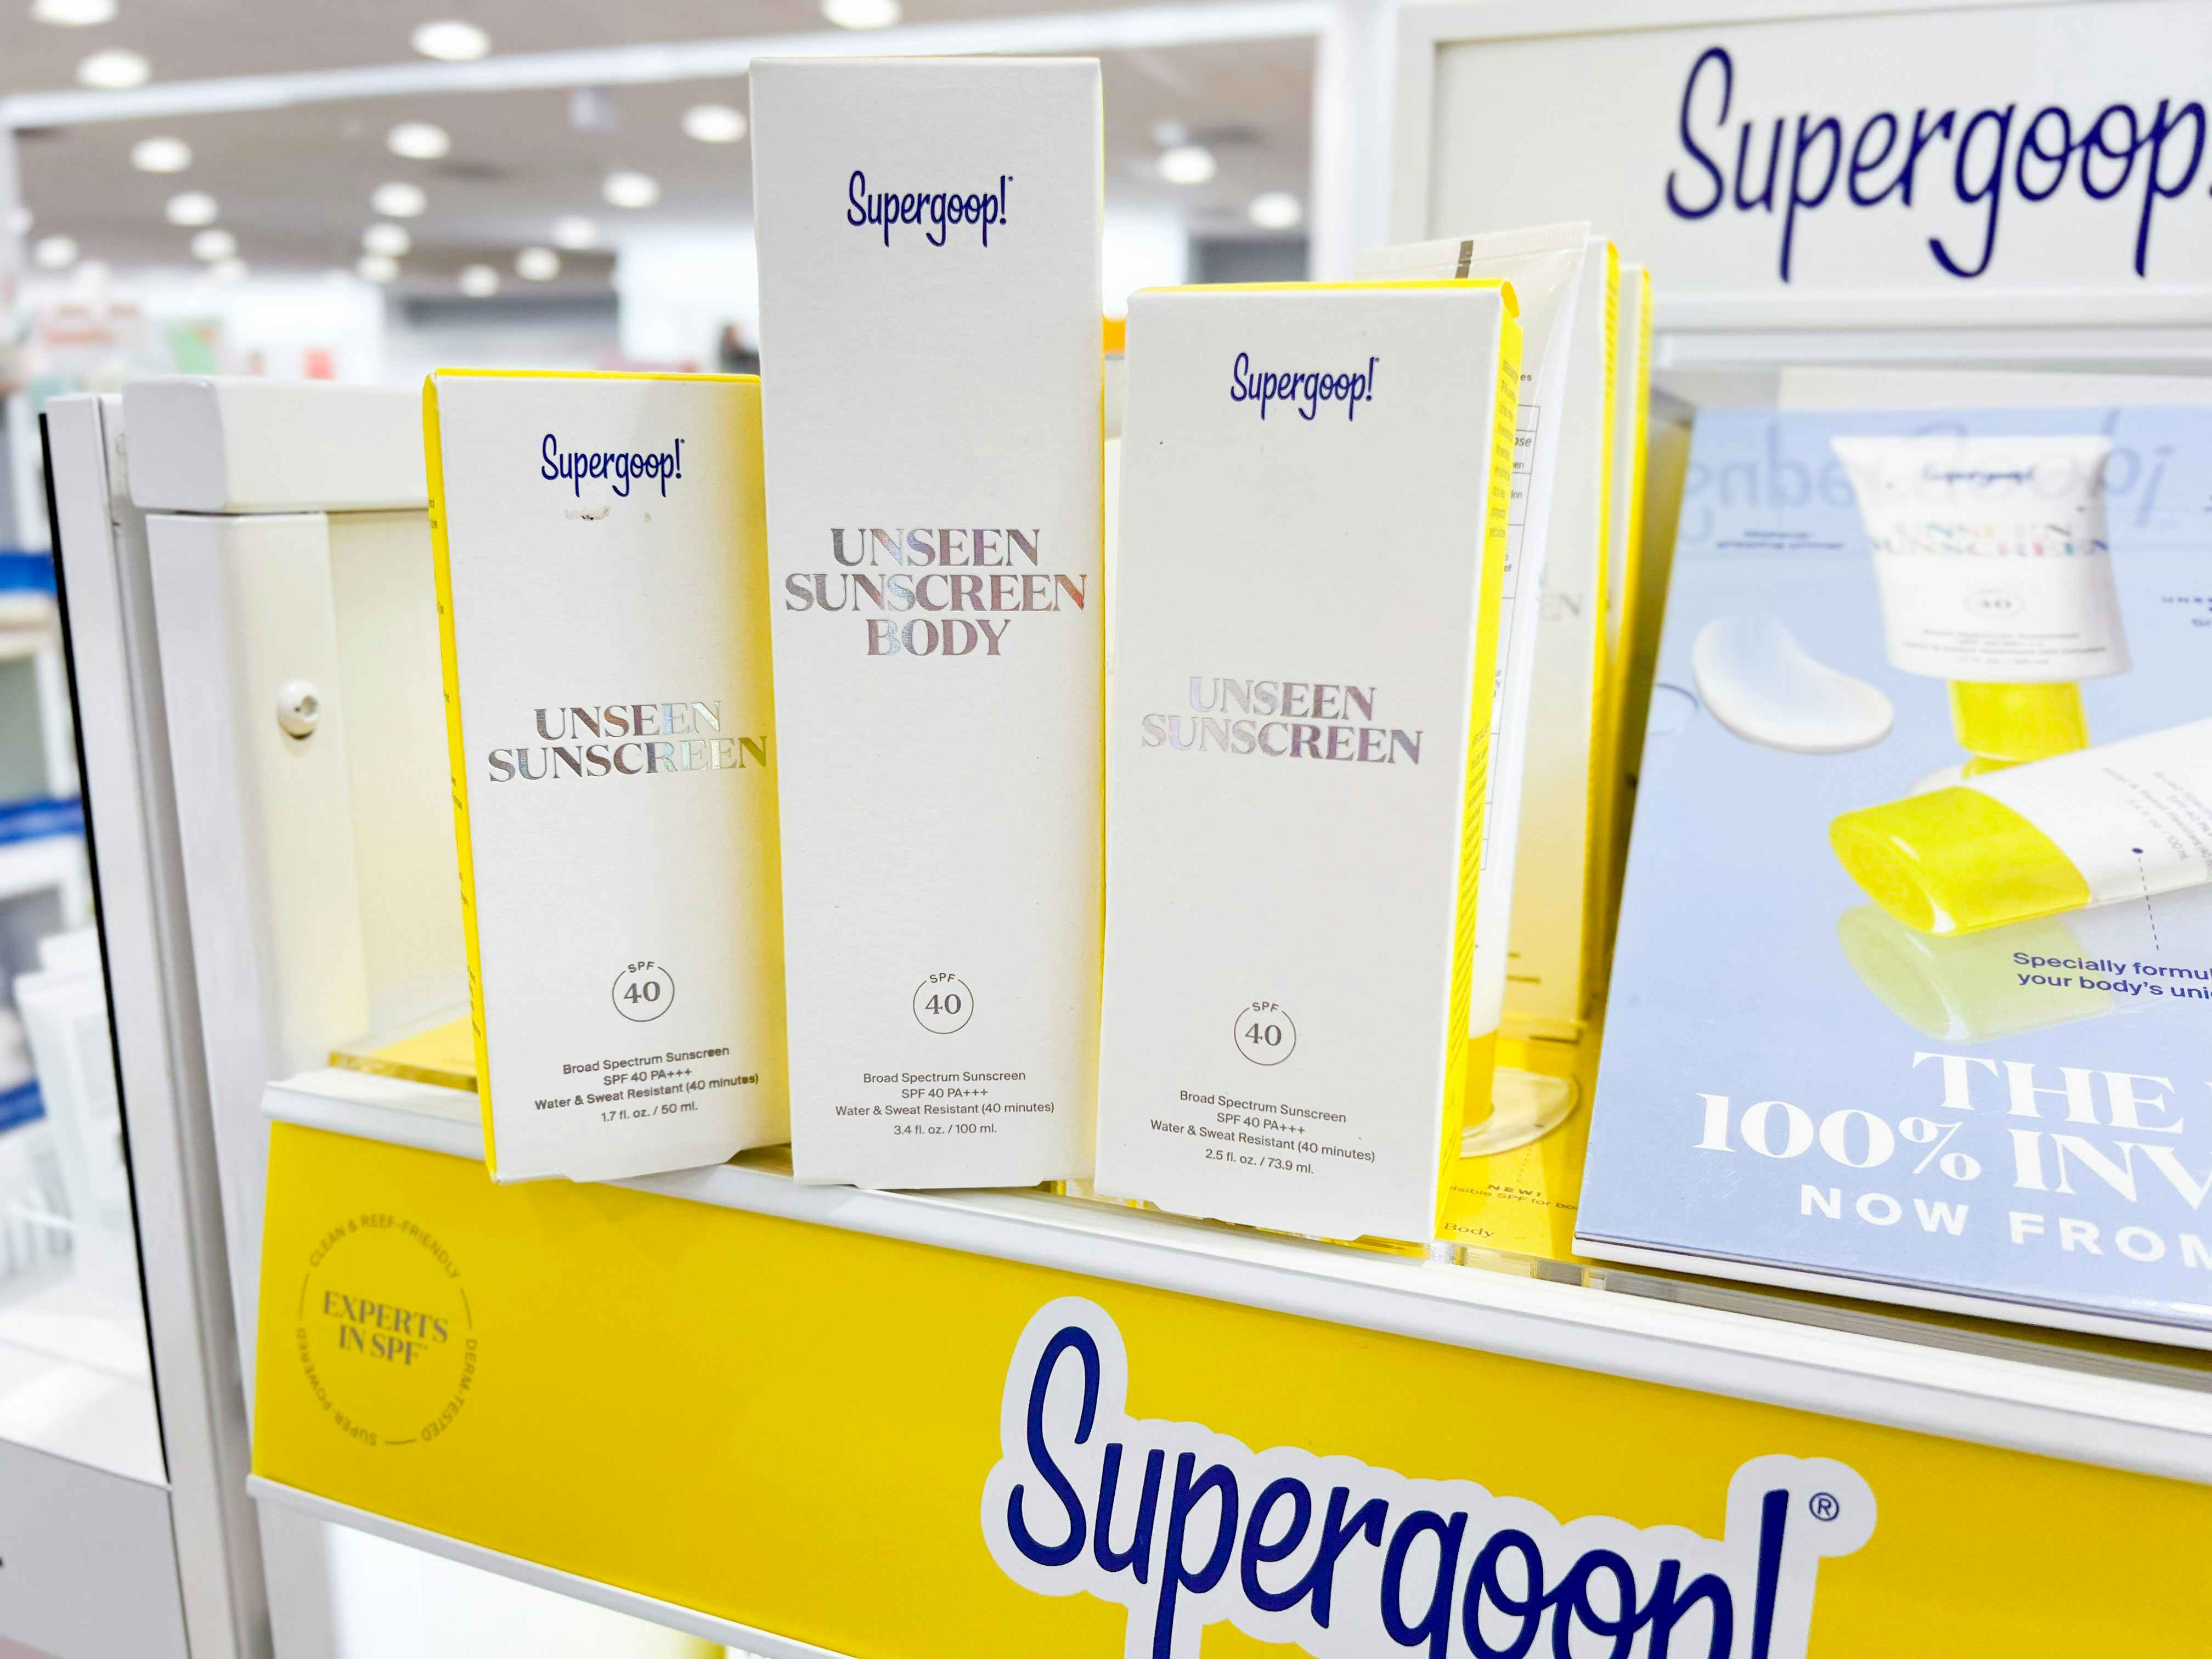 Supergoop Sunscreen Clearance: Pay $7.99 With Amazon Prime (Up to 79% Off)